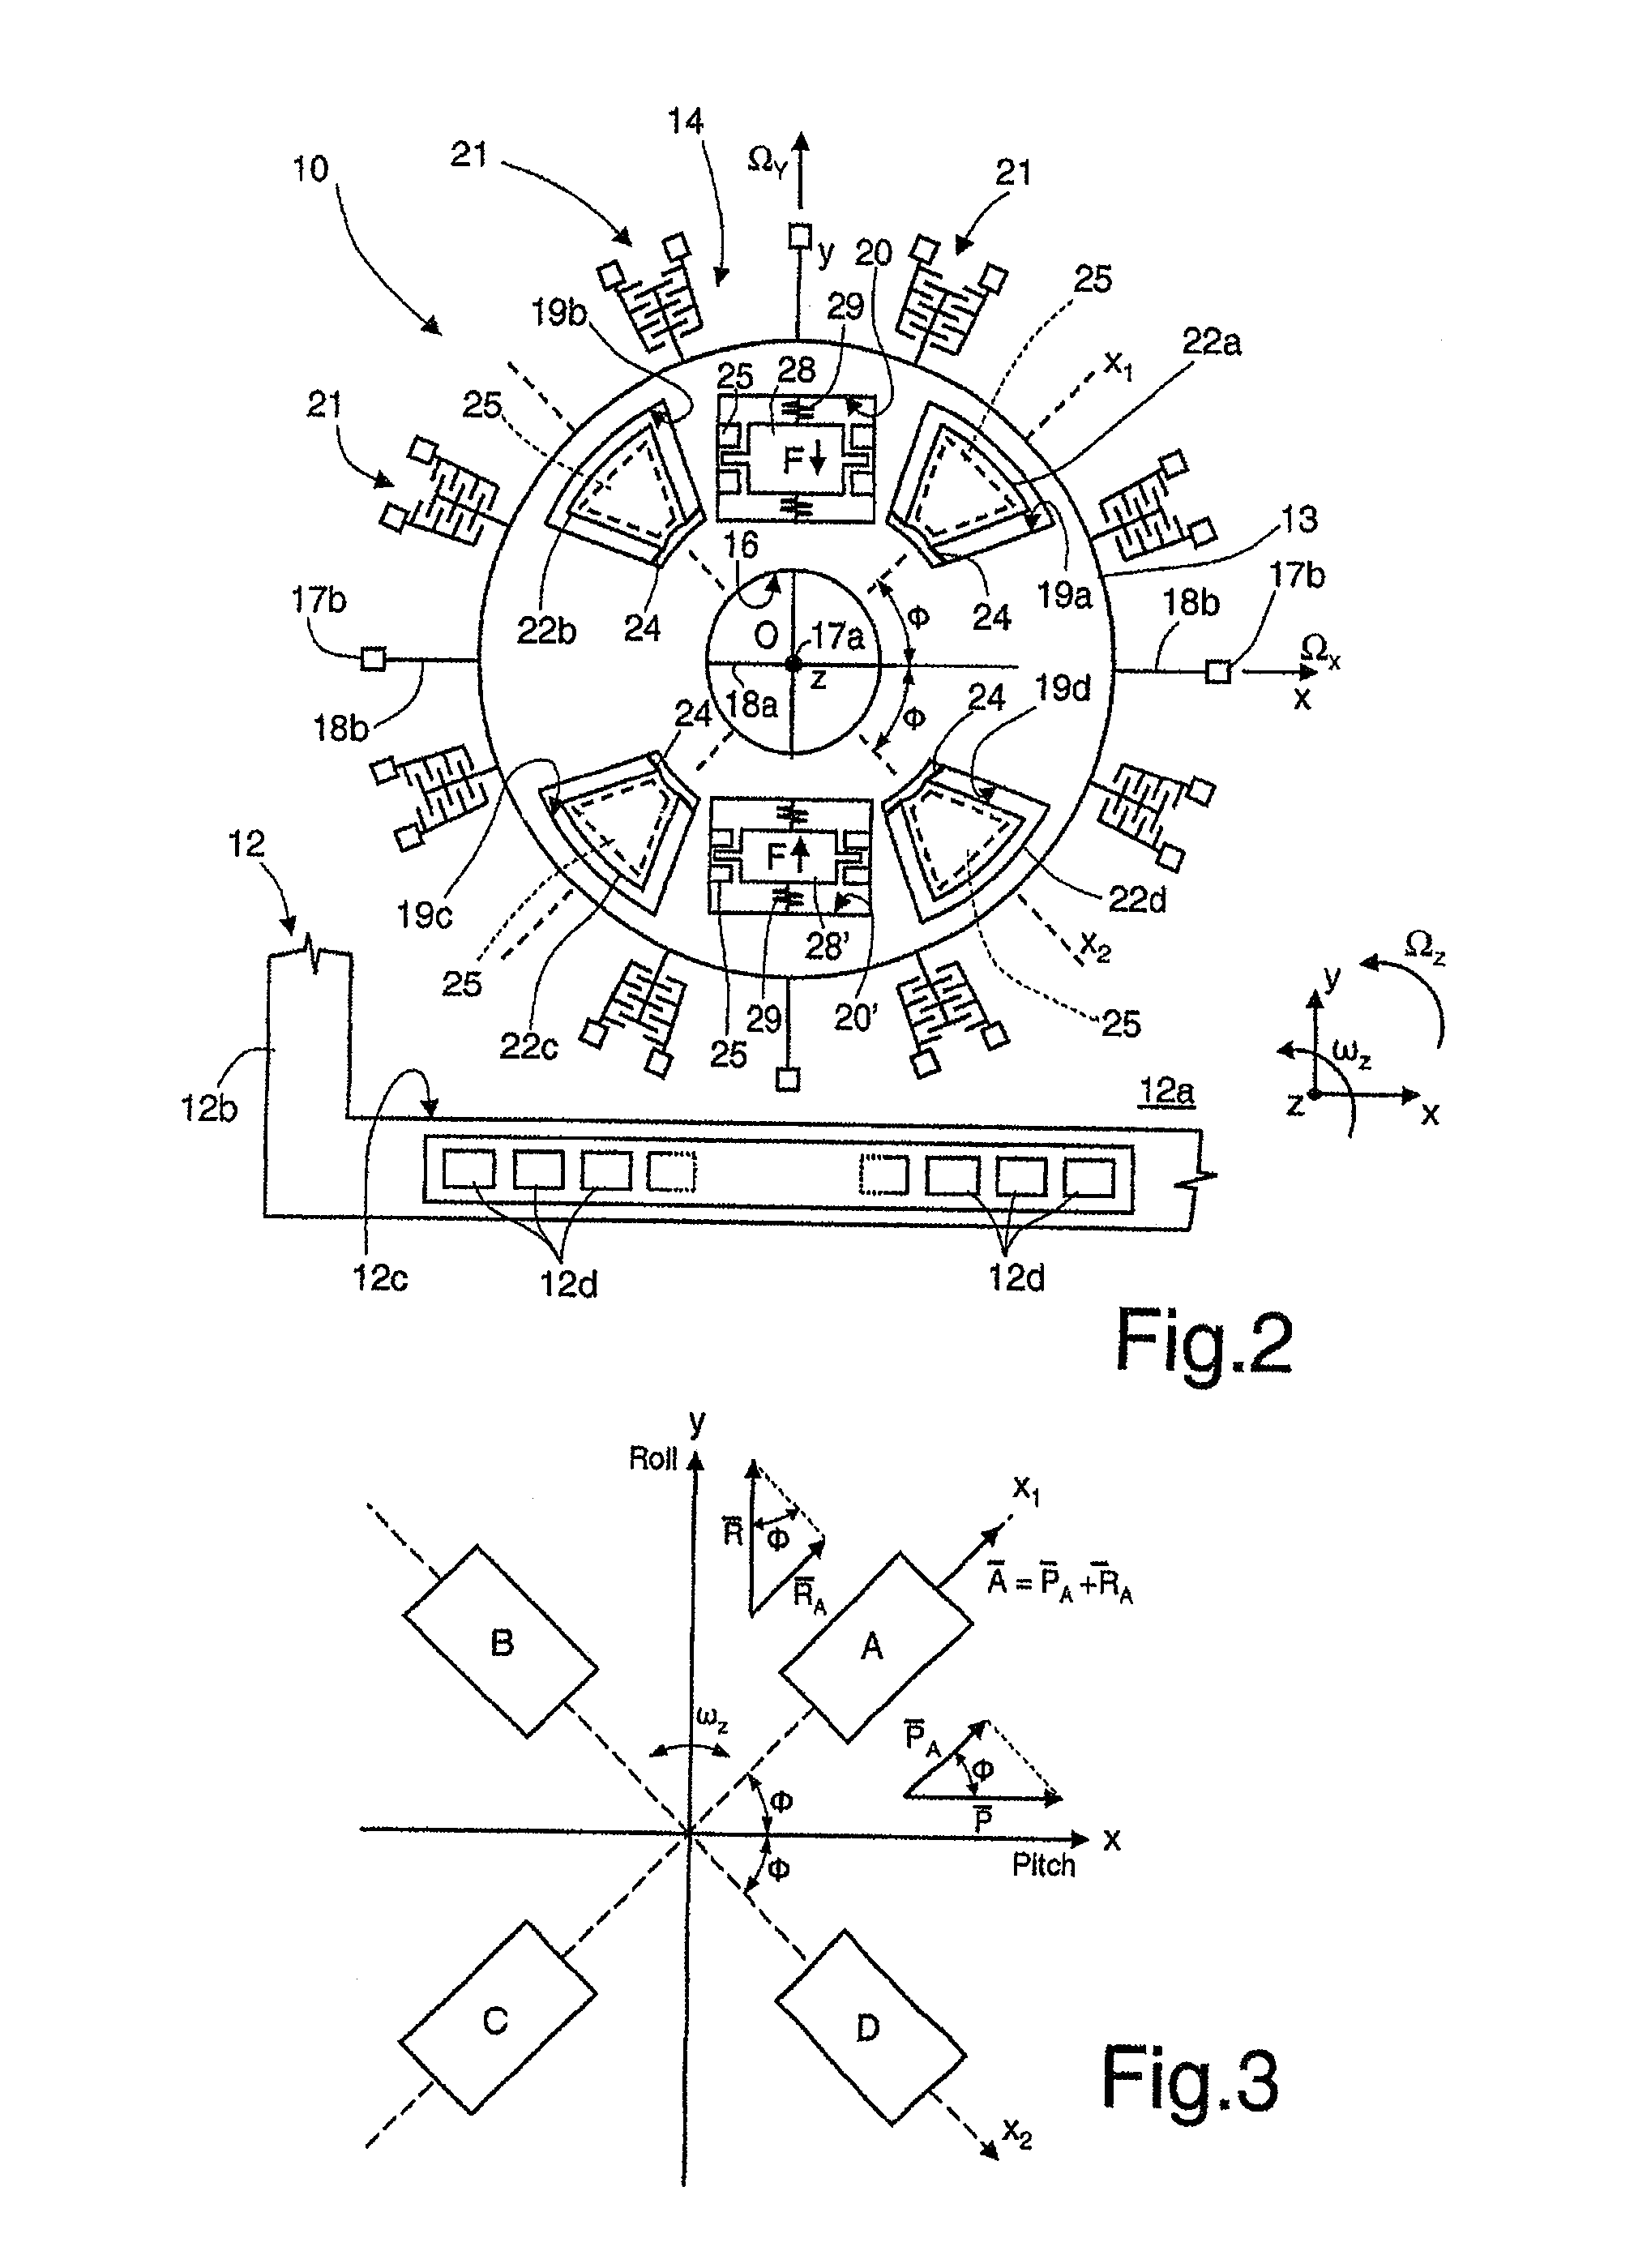 Reading circuit for a multi-axis MEMS gyroscope having detection directions inclined with respect to the reference axes, and corresponding multi-axis MEMS gyroscope